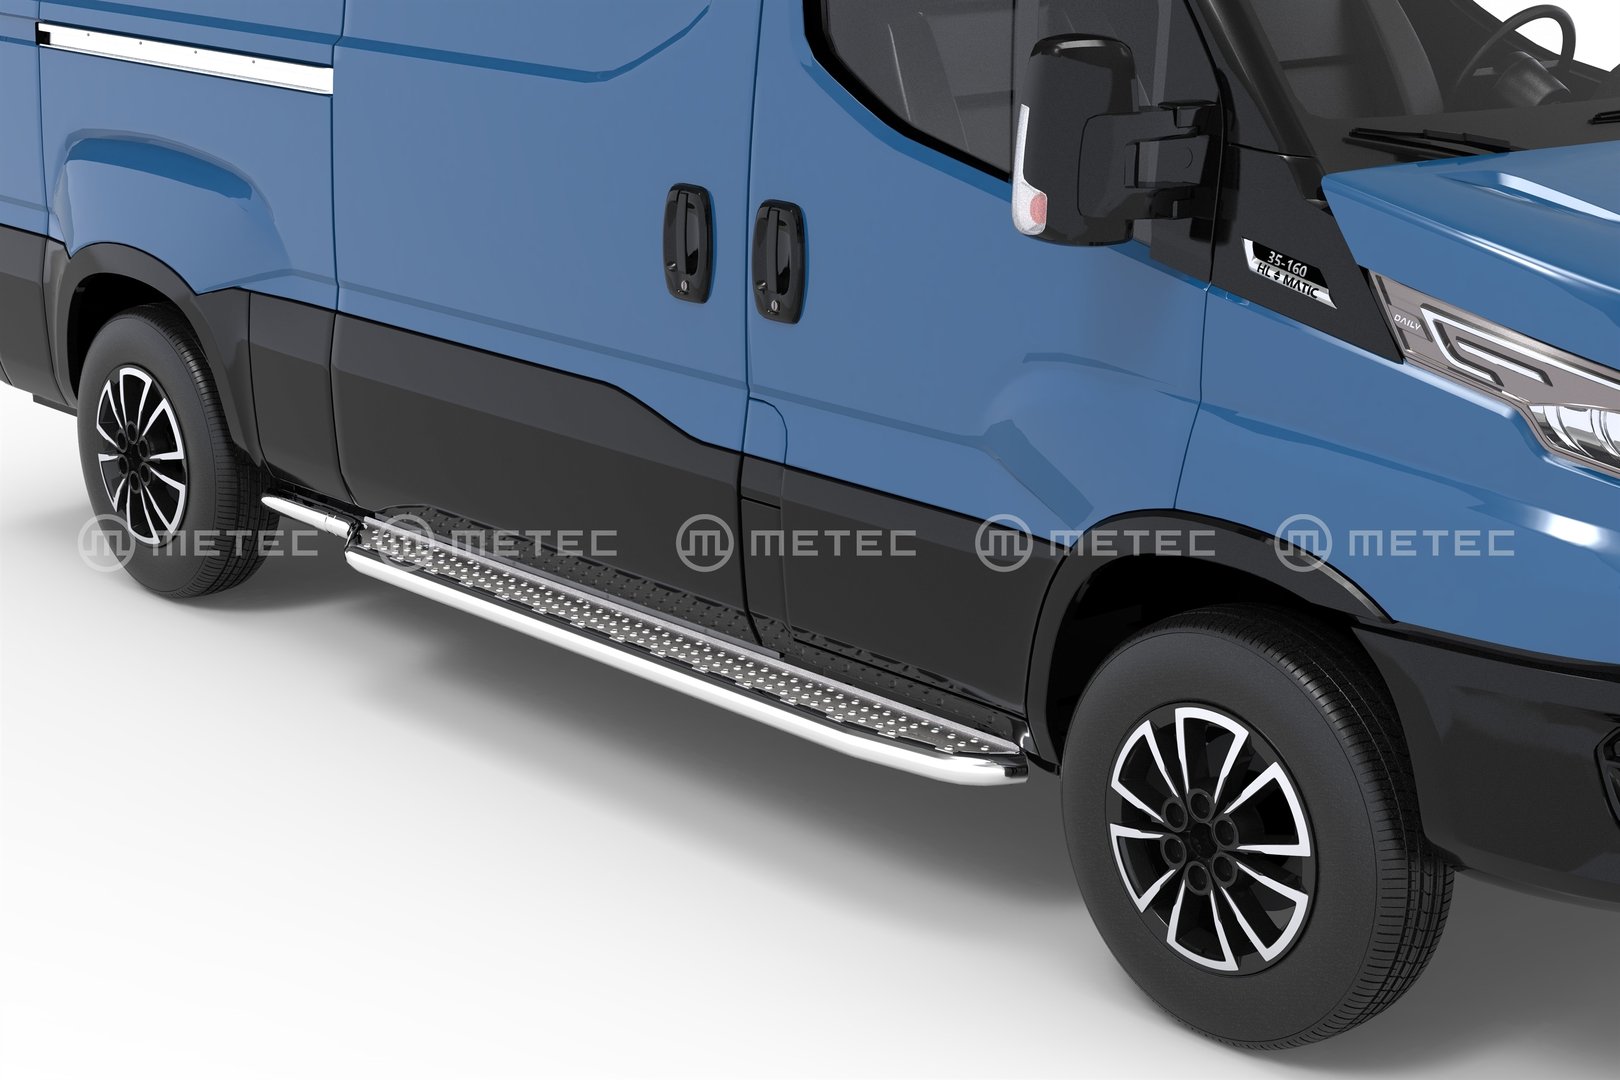 Iveco Daily "Tour" side steps (Metec)